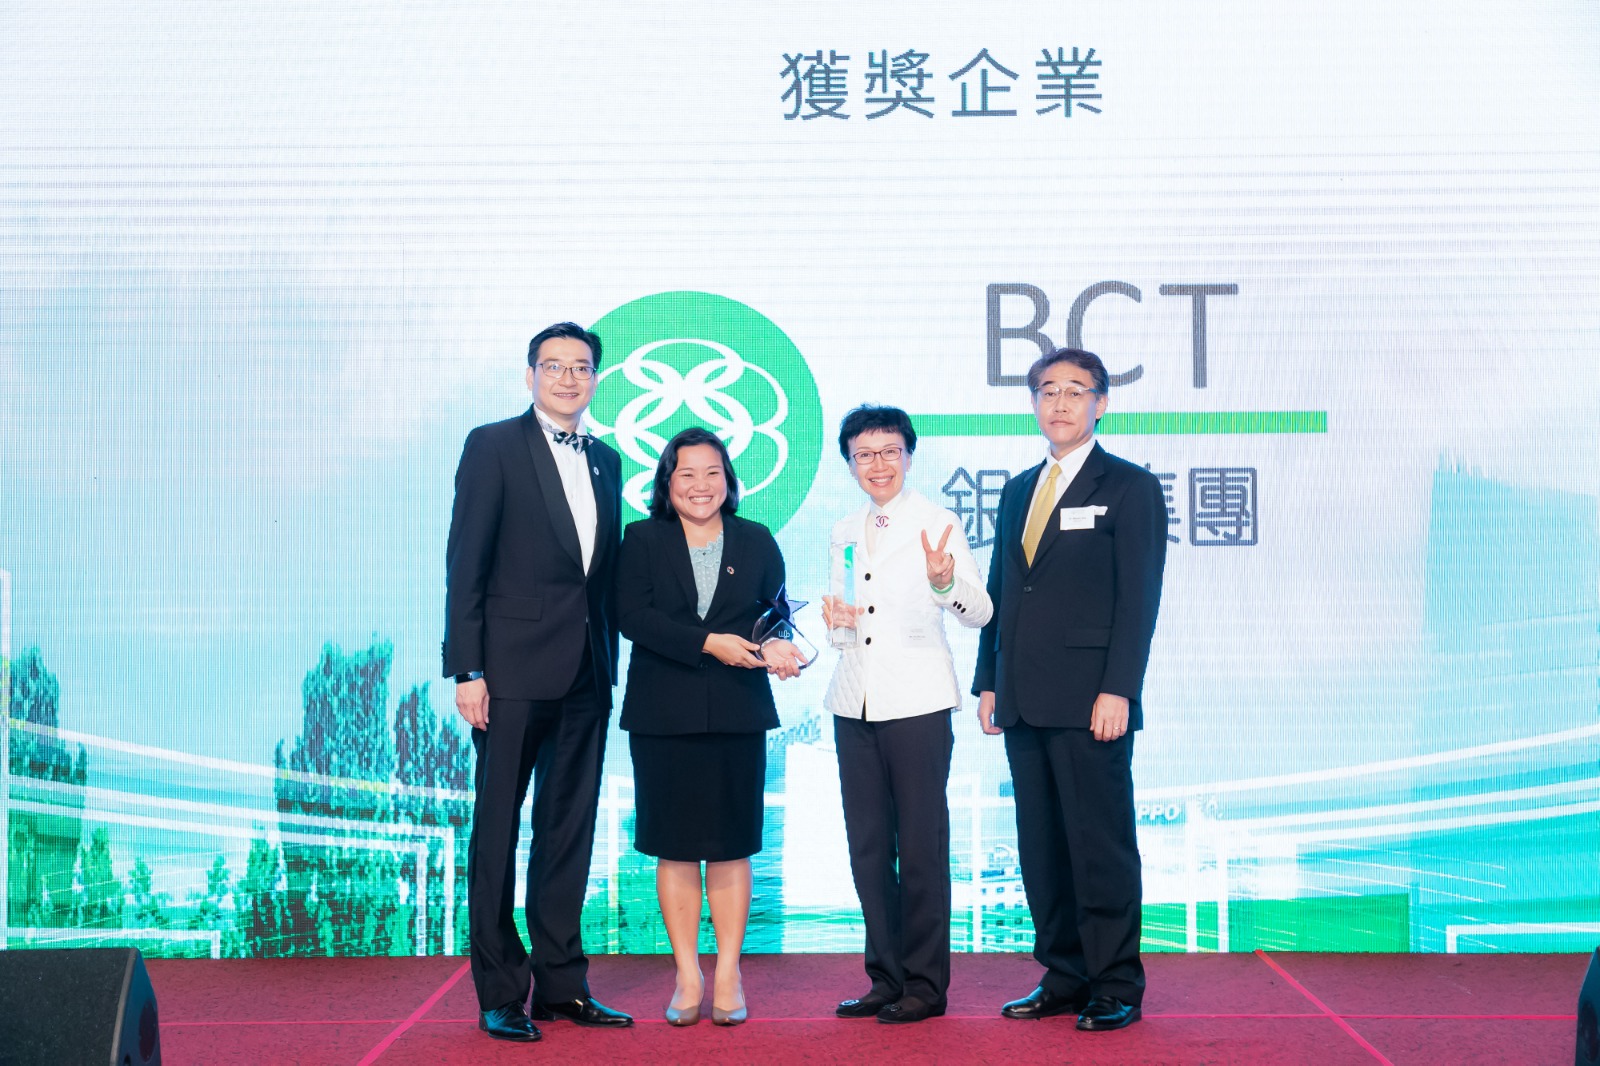 Ka Shi Lau, Managing Director & CEO of BCT (second from the right), received two awards from Tientip Subhanij, Chief of Financing for Development Section, MPFD, ESCAP (second from the left)